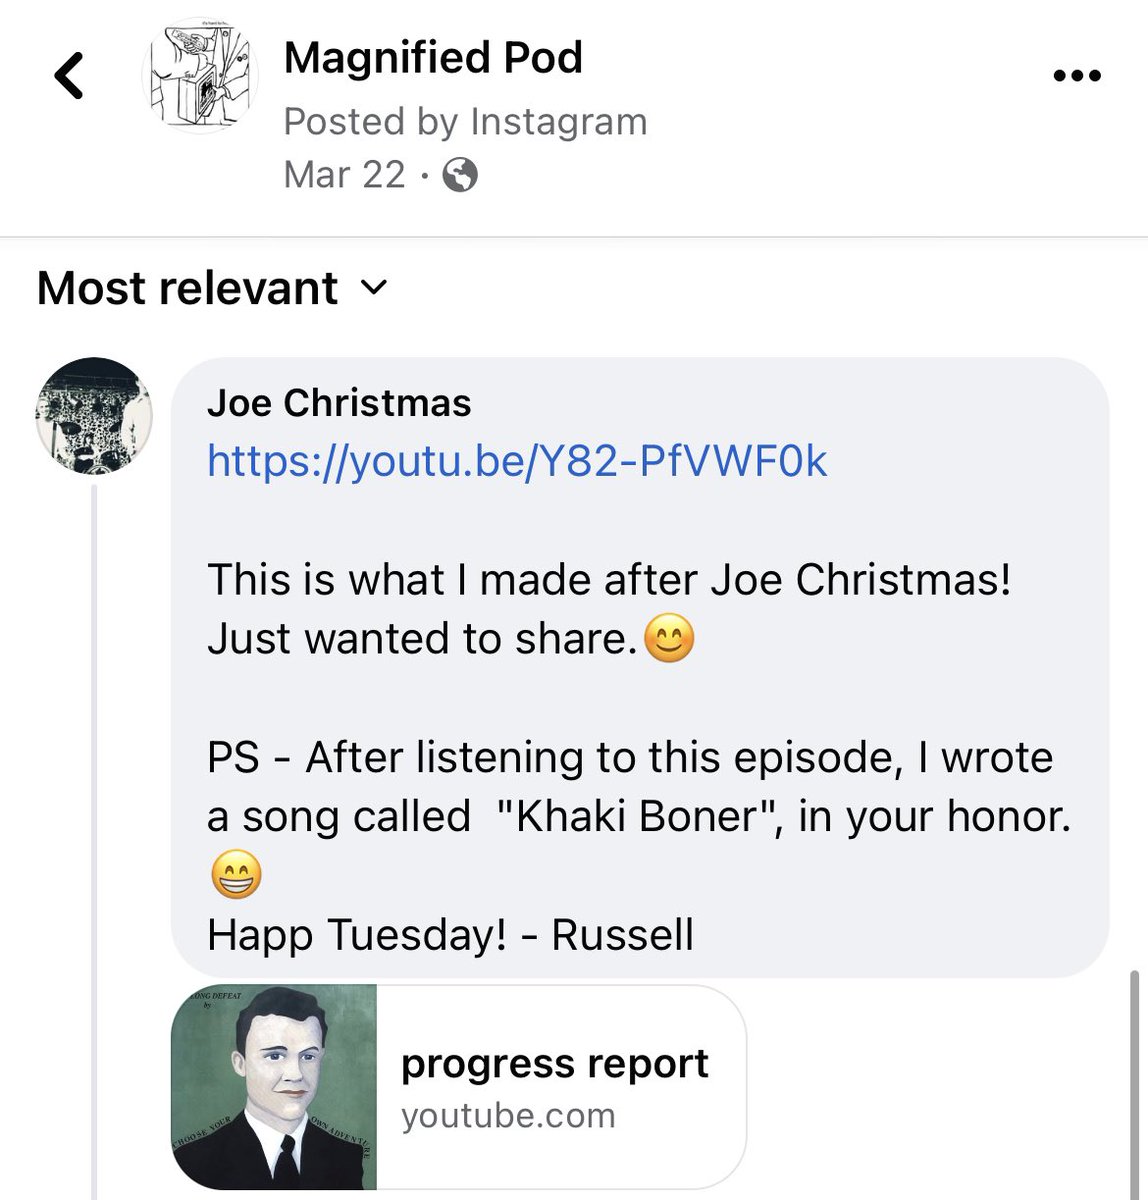 1. Please check out Russell from Joe Christmas’ post-#JoeChristmas band The Long Defeat because this song rules.

2. Please tell Russell that the people demand to hear his new song “Khaki Boner,” which he wrote in honor of us after listening to our last episode 😂